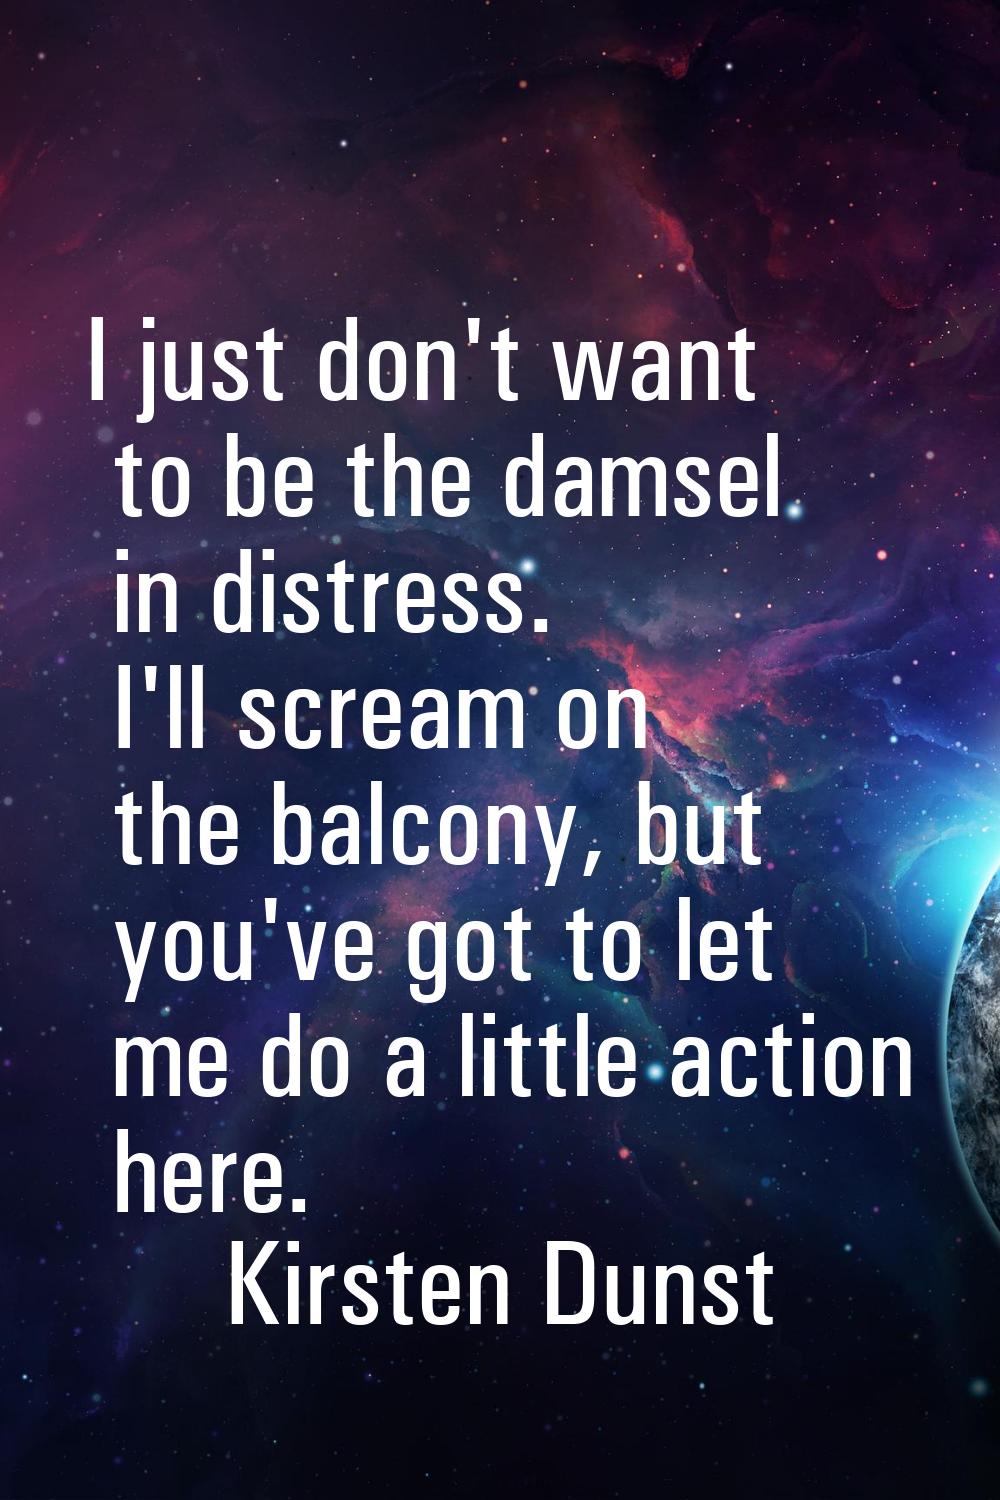 I just don't want to be the damsel in distress. I'll scream on the balcony, but you've got to let m